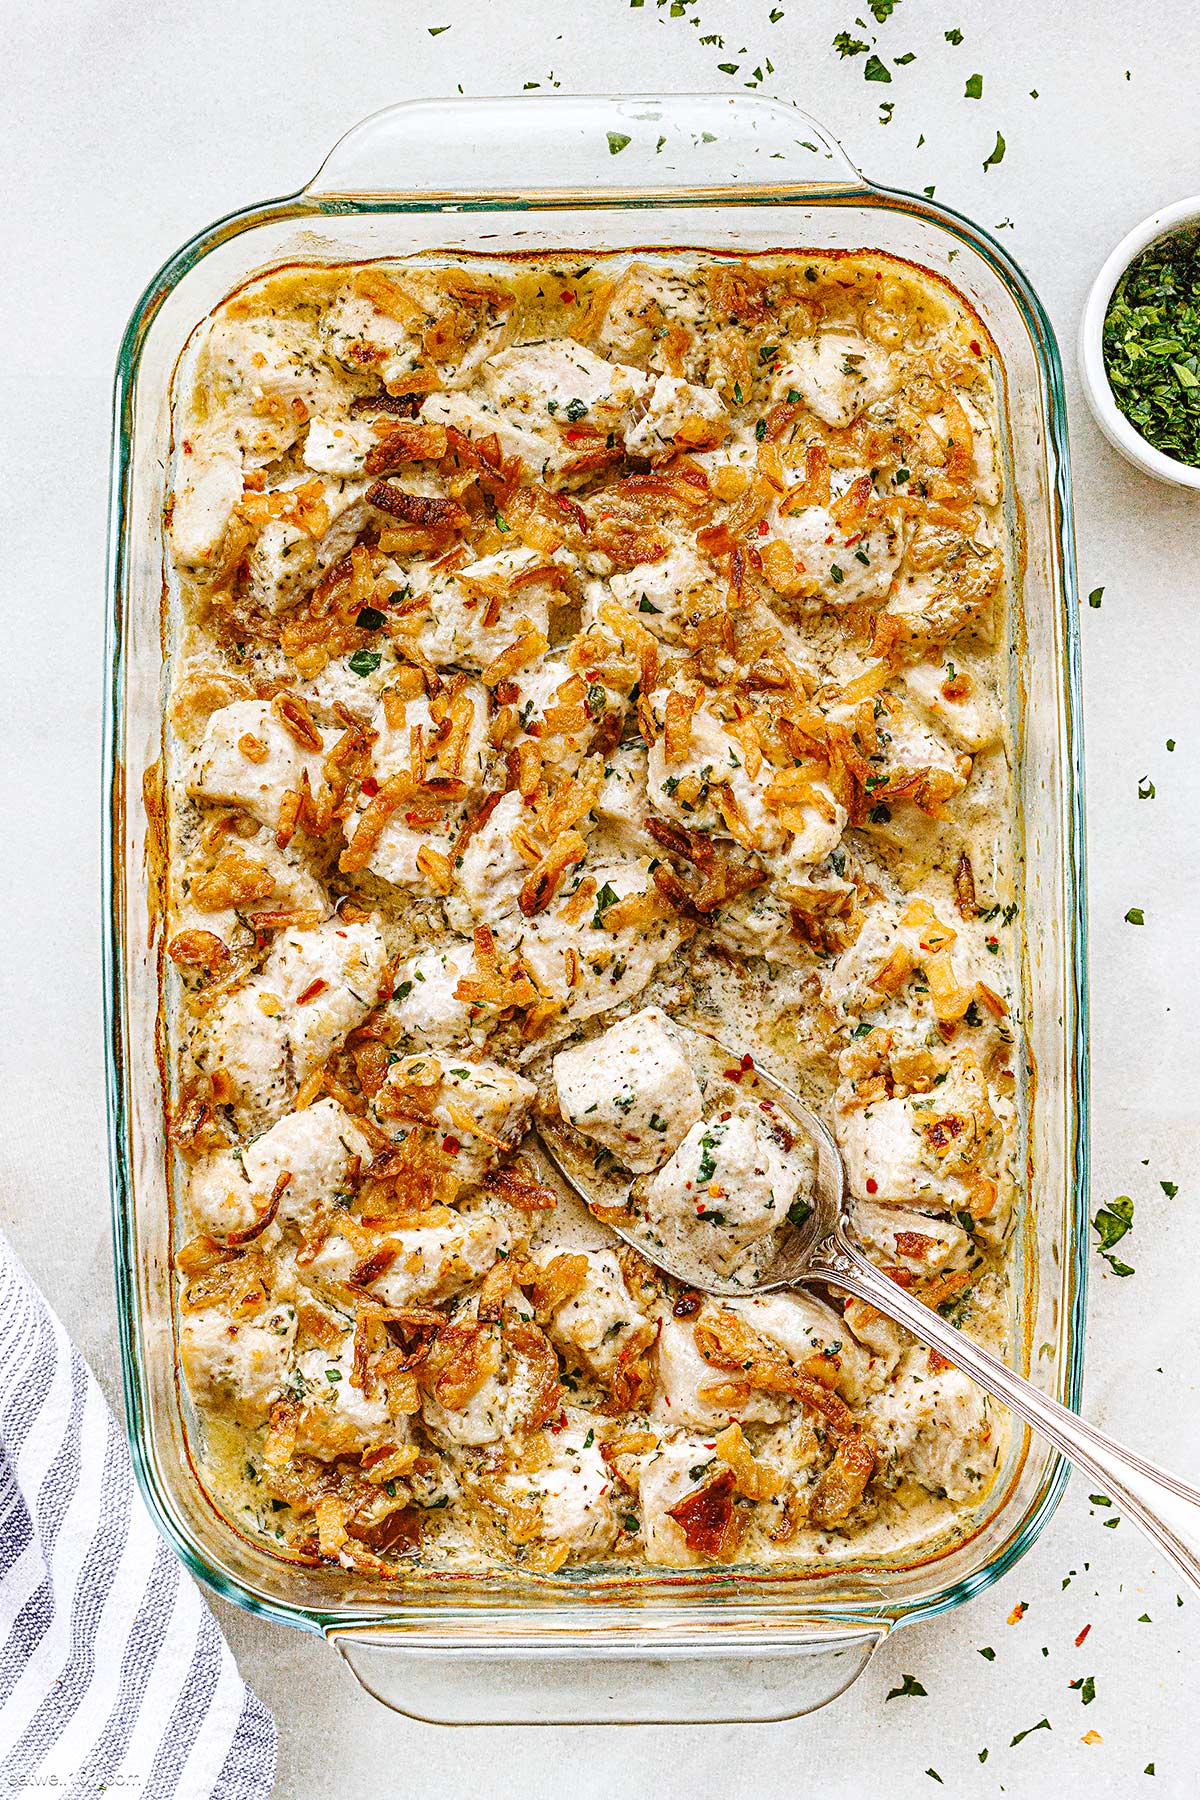 baked chicken casserole in the oven